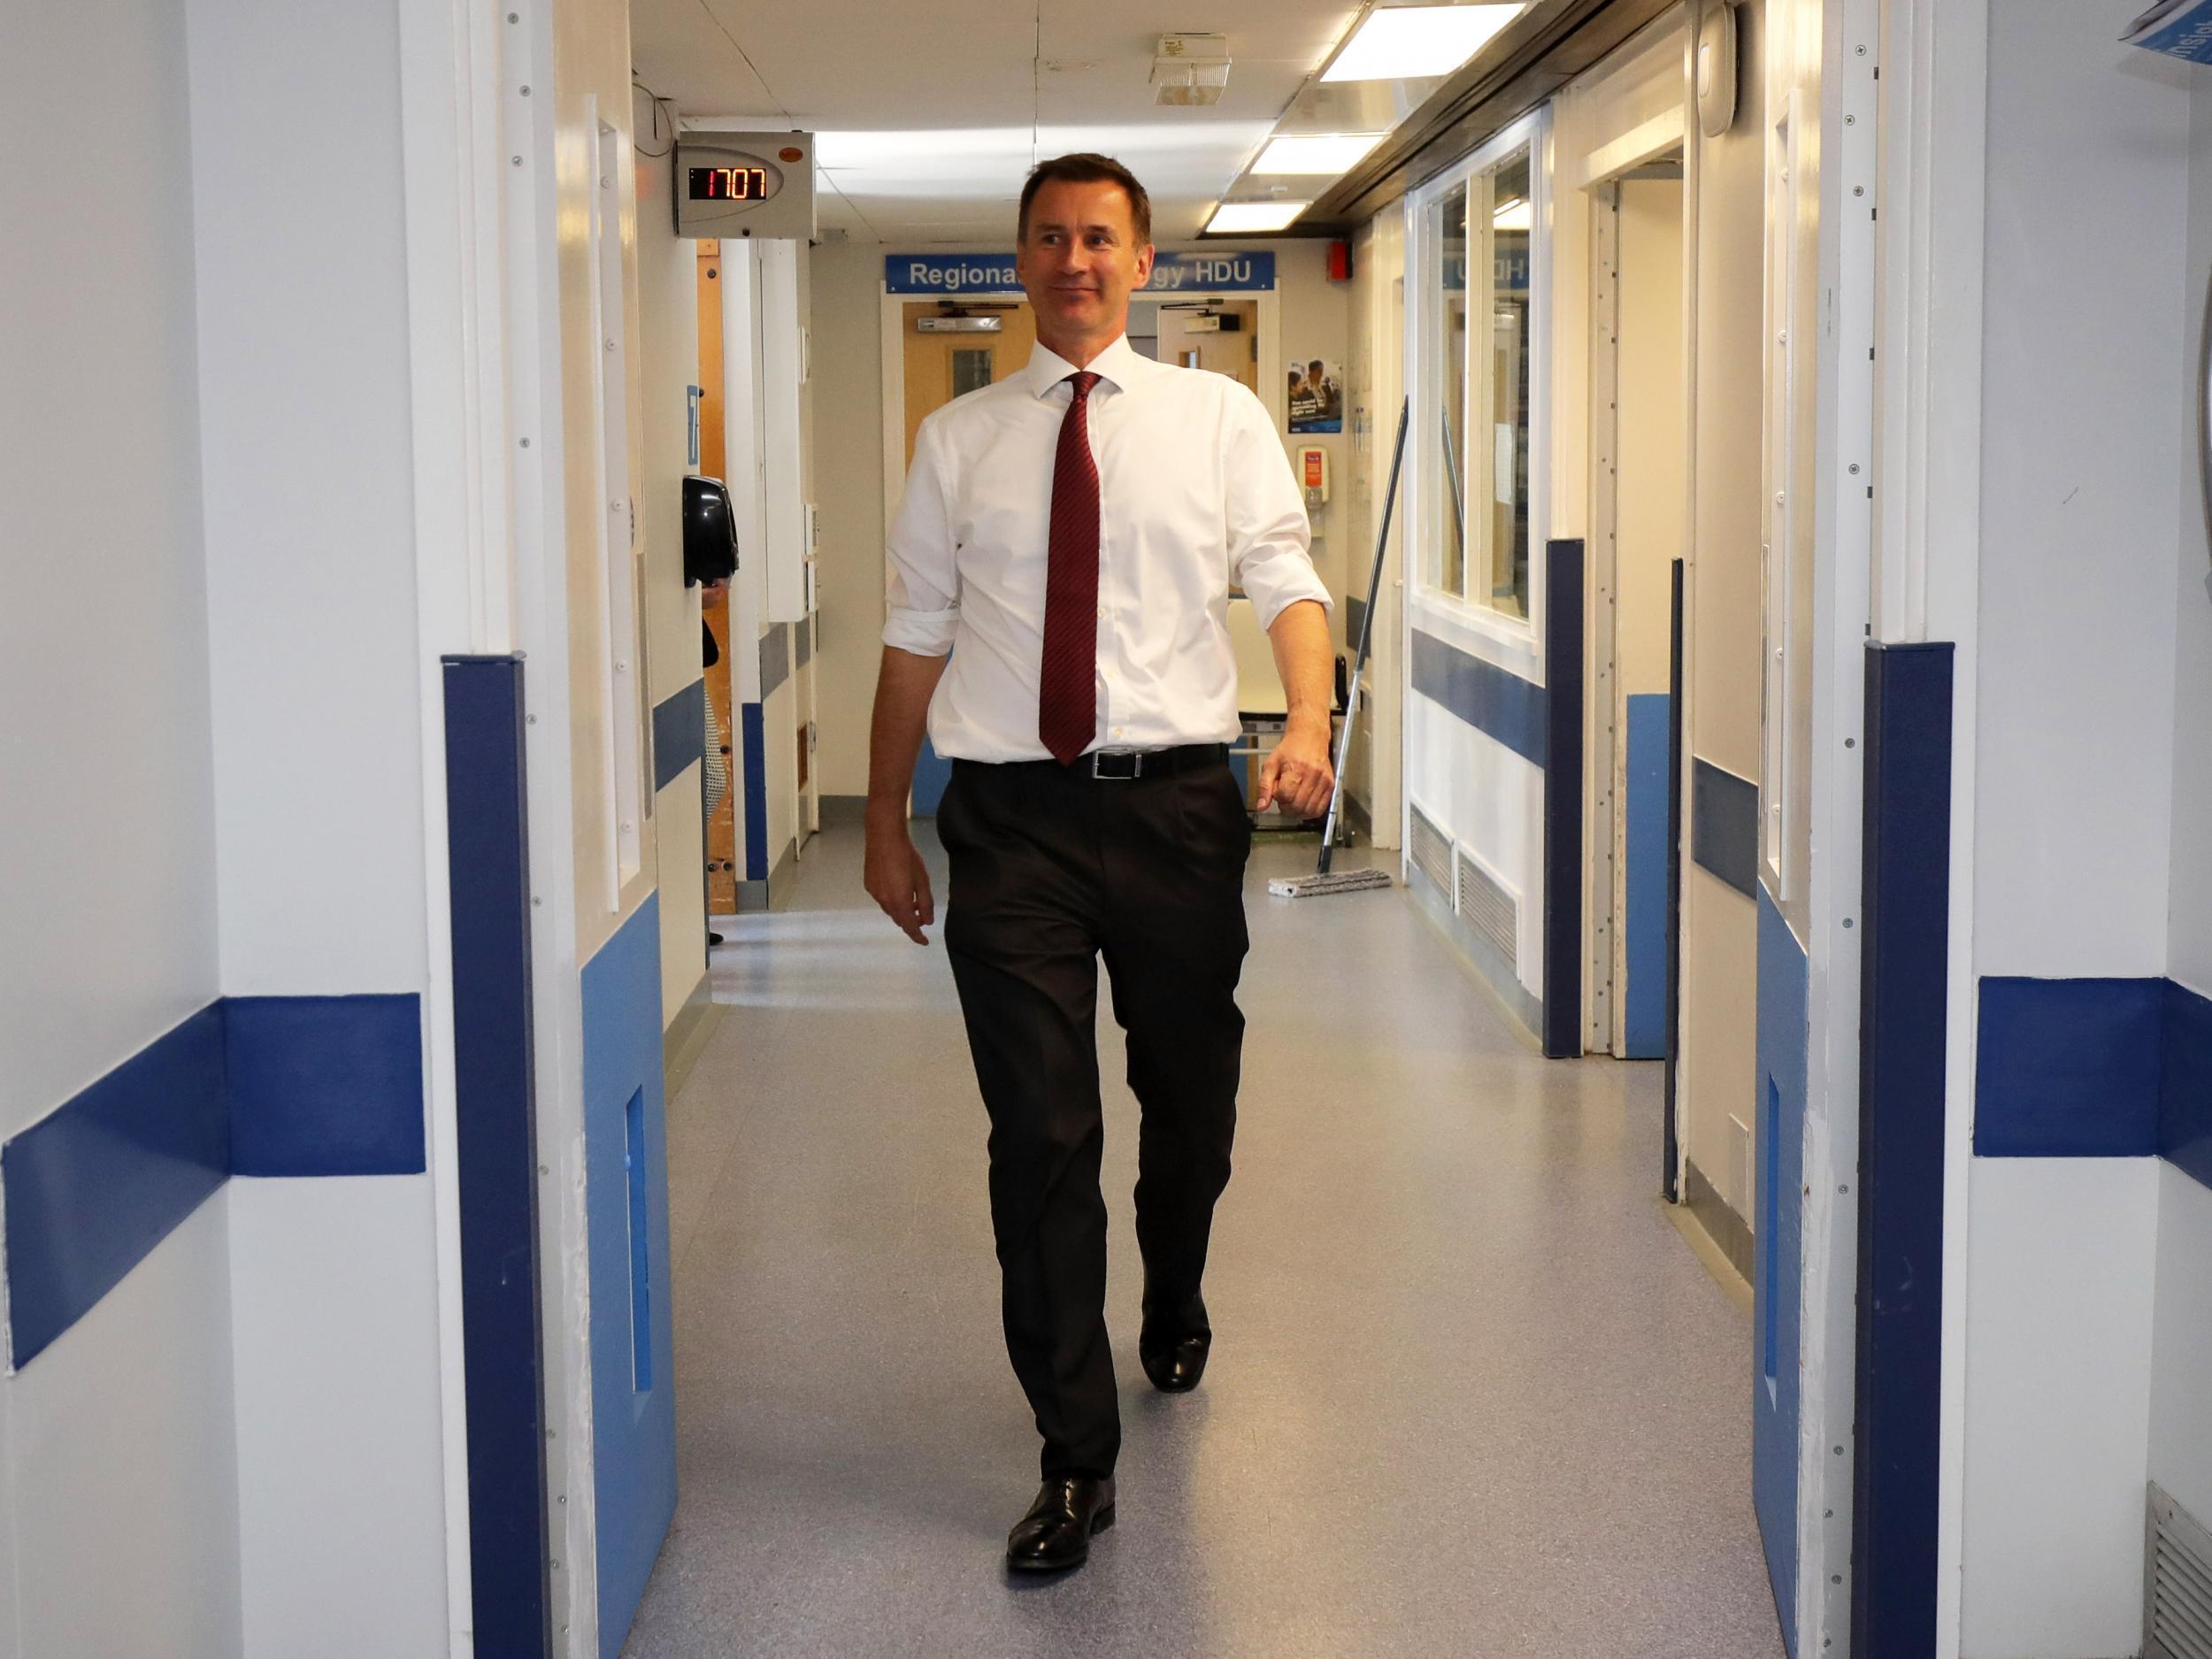 Jeremy Hunt has frequently downplayed the role private firms have in the NHS